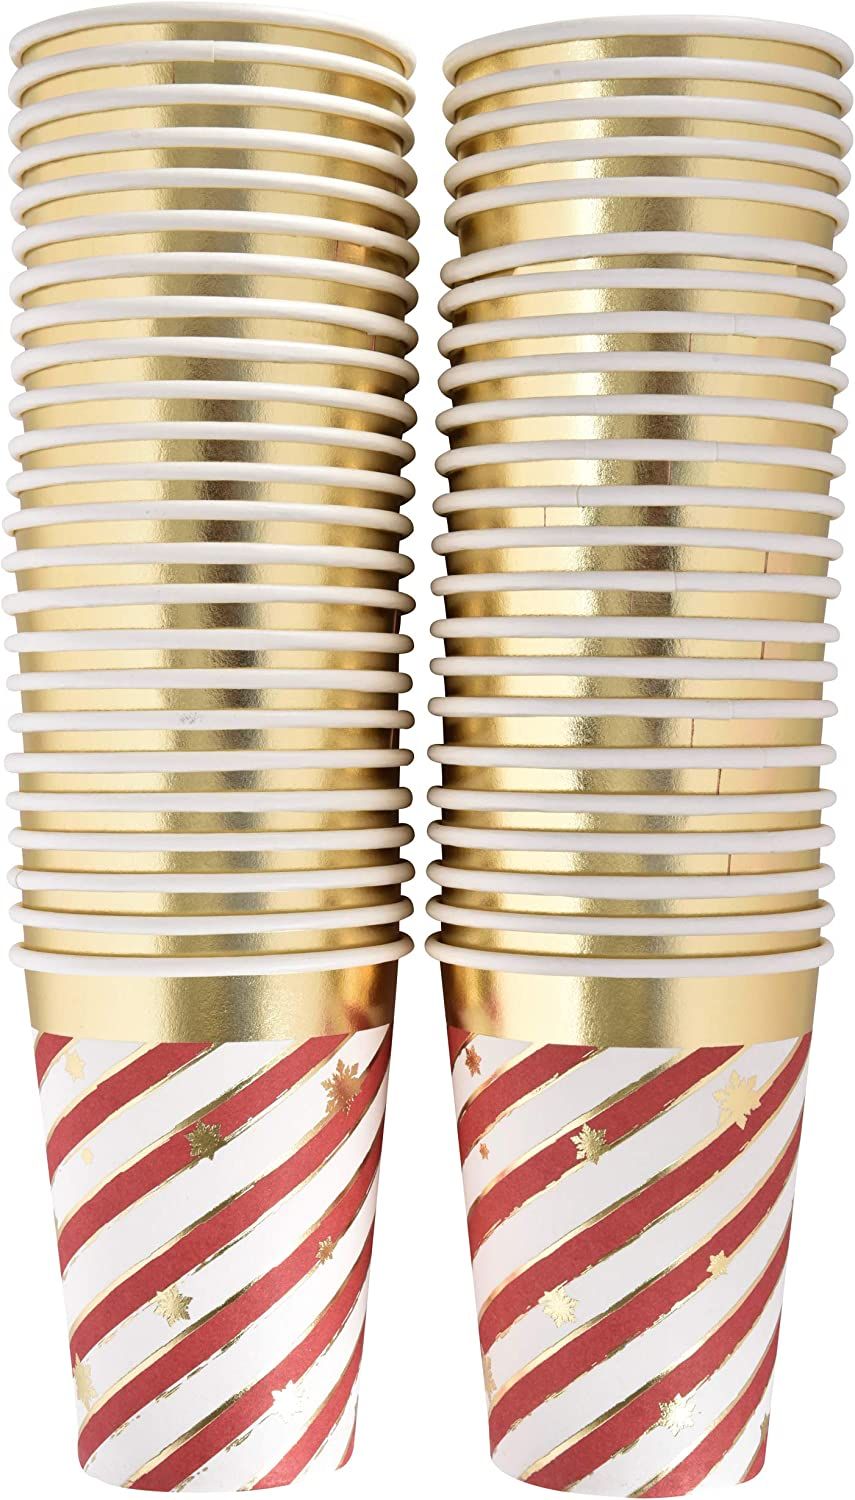 50 Disposable Christmas Cups 9 oz. Paper in Elegant Candy Cane Striped Design with Gold Foil Outl... | Amazon (US)